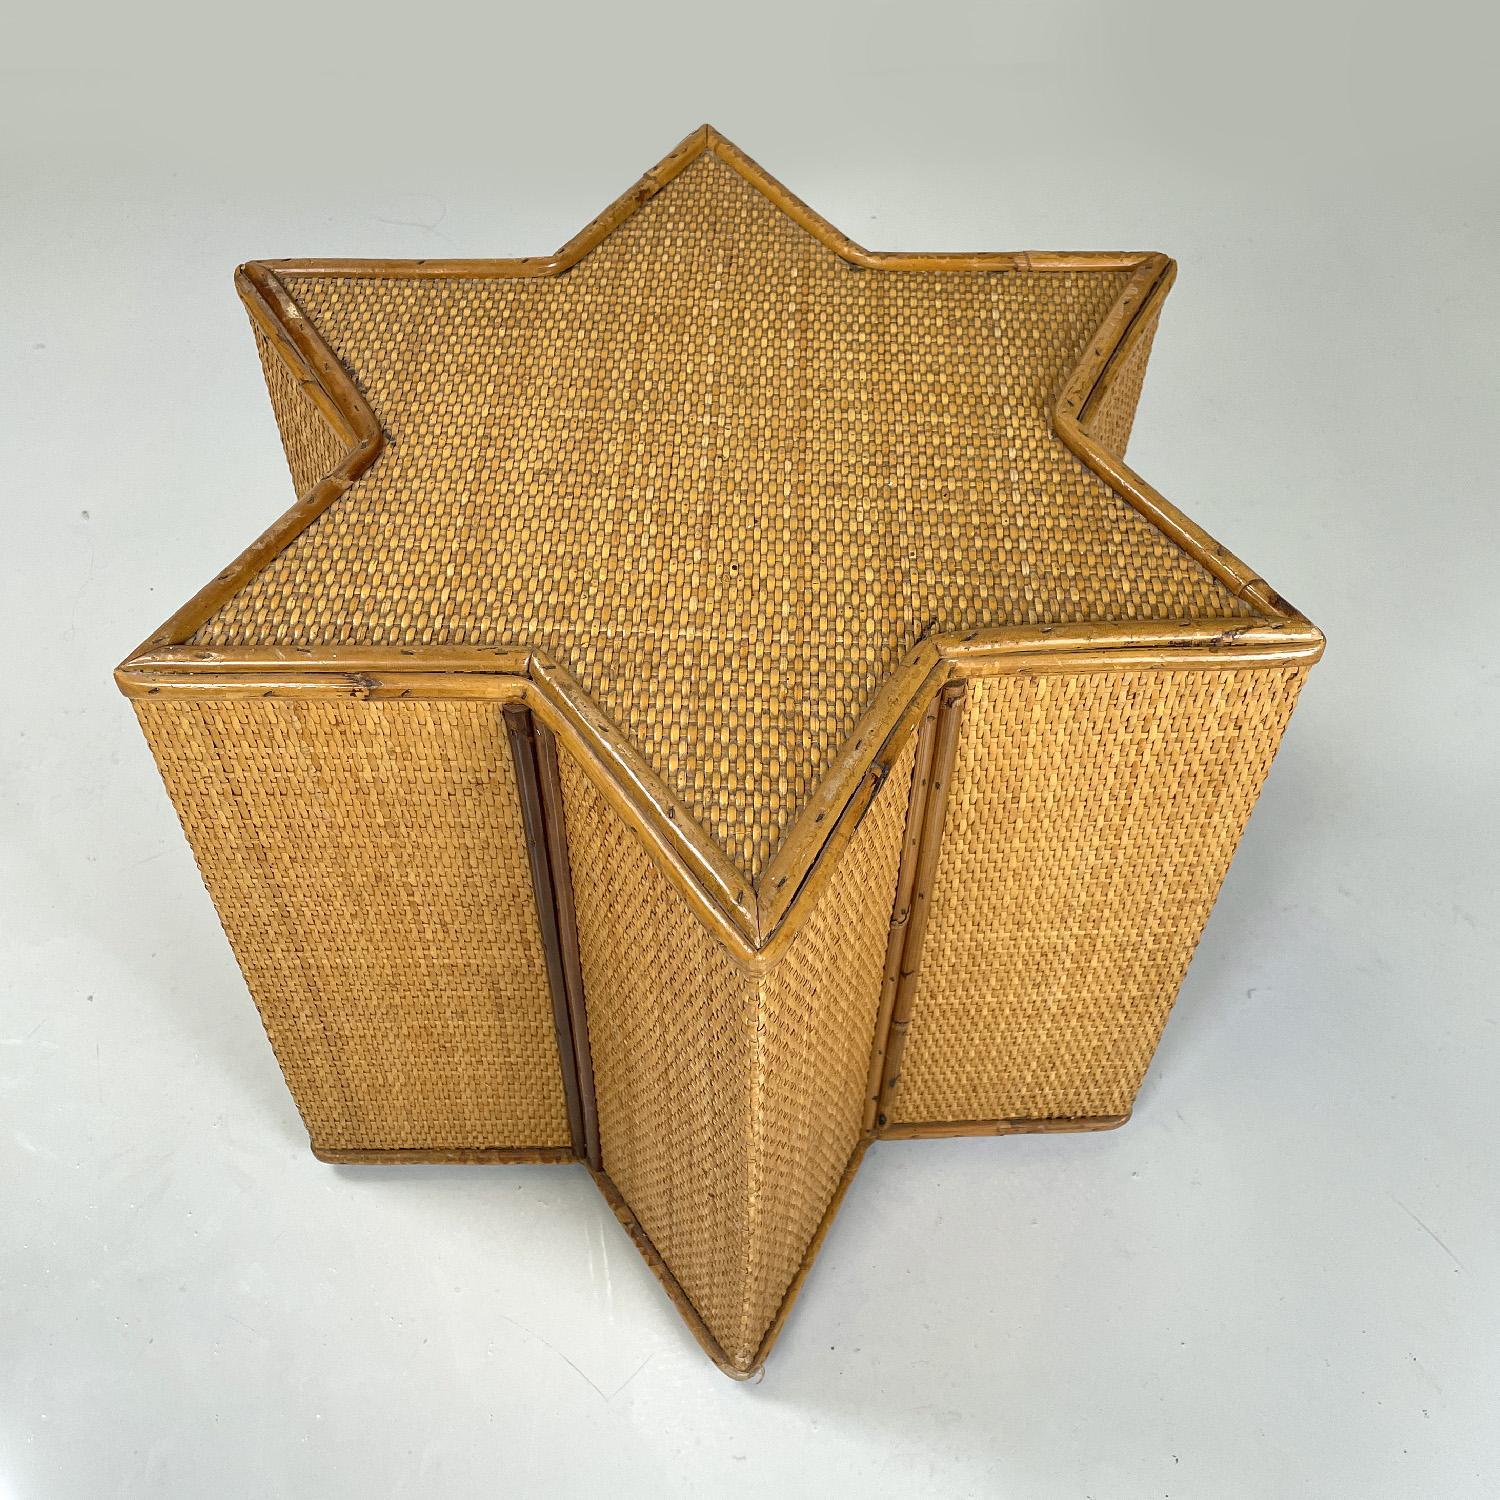 Late 20th Century Italian modern rattan star shaped coffee table by Vivai del Sud, 1970s